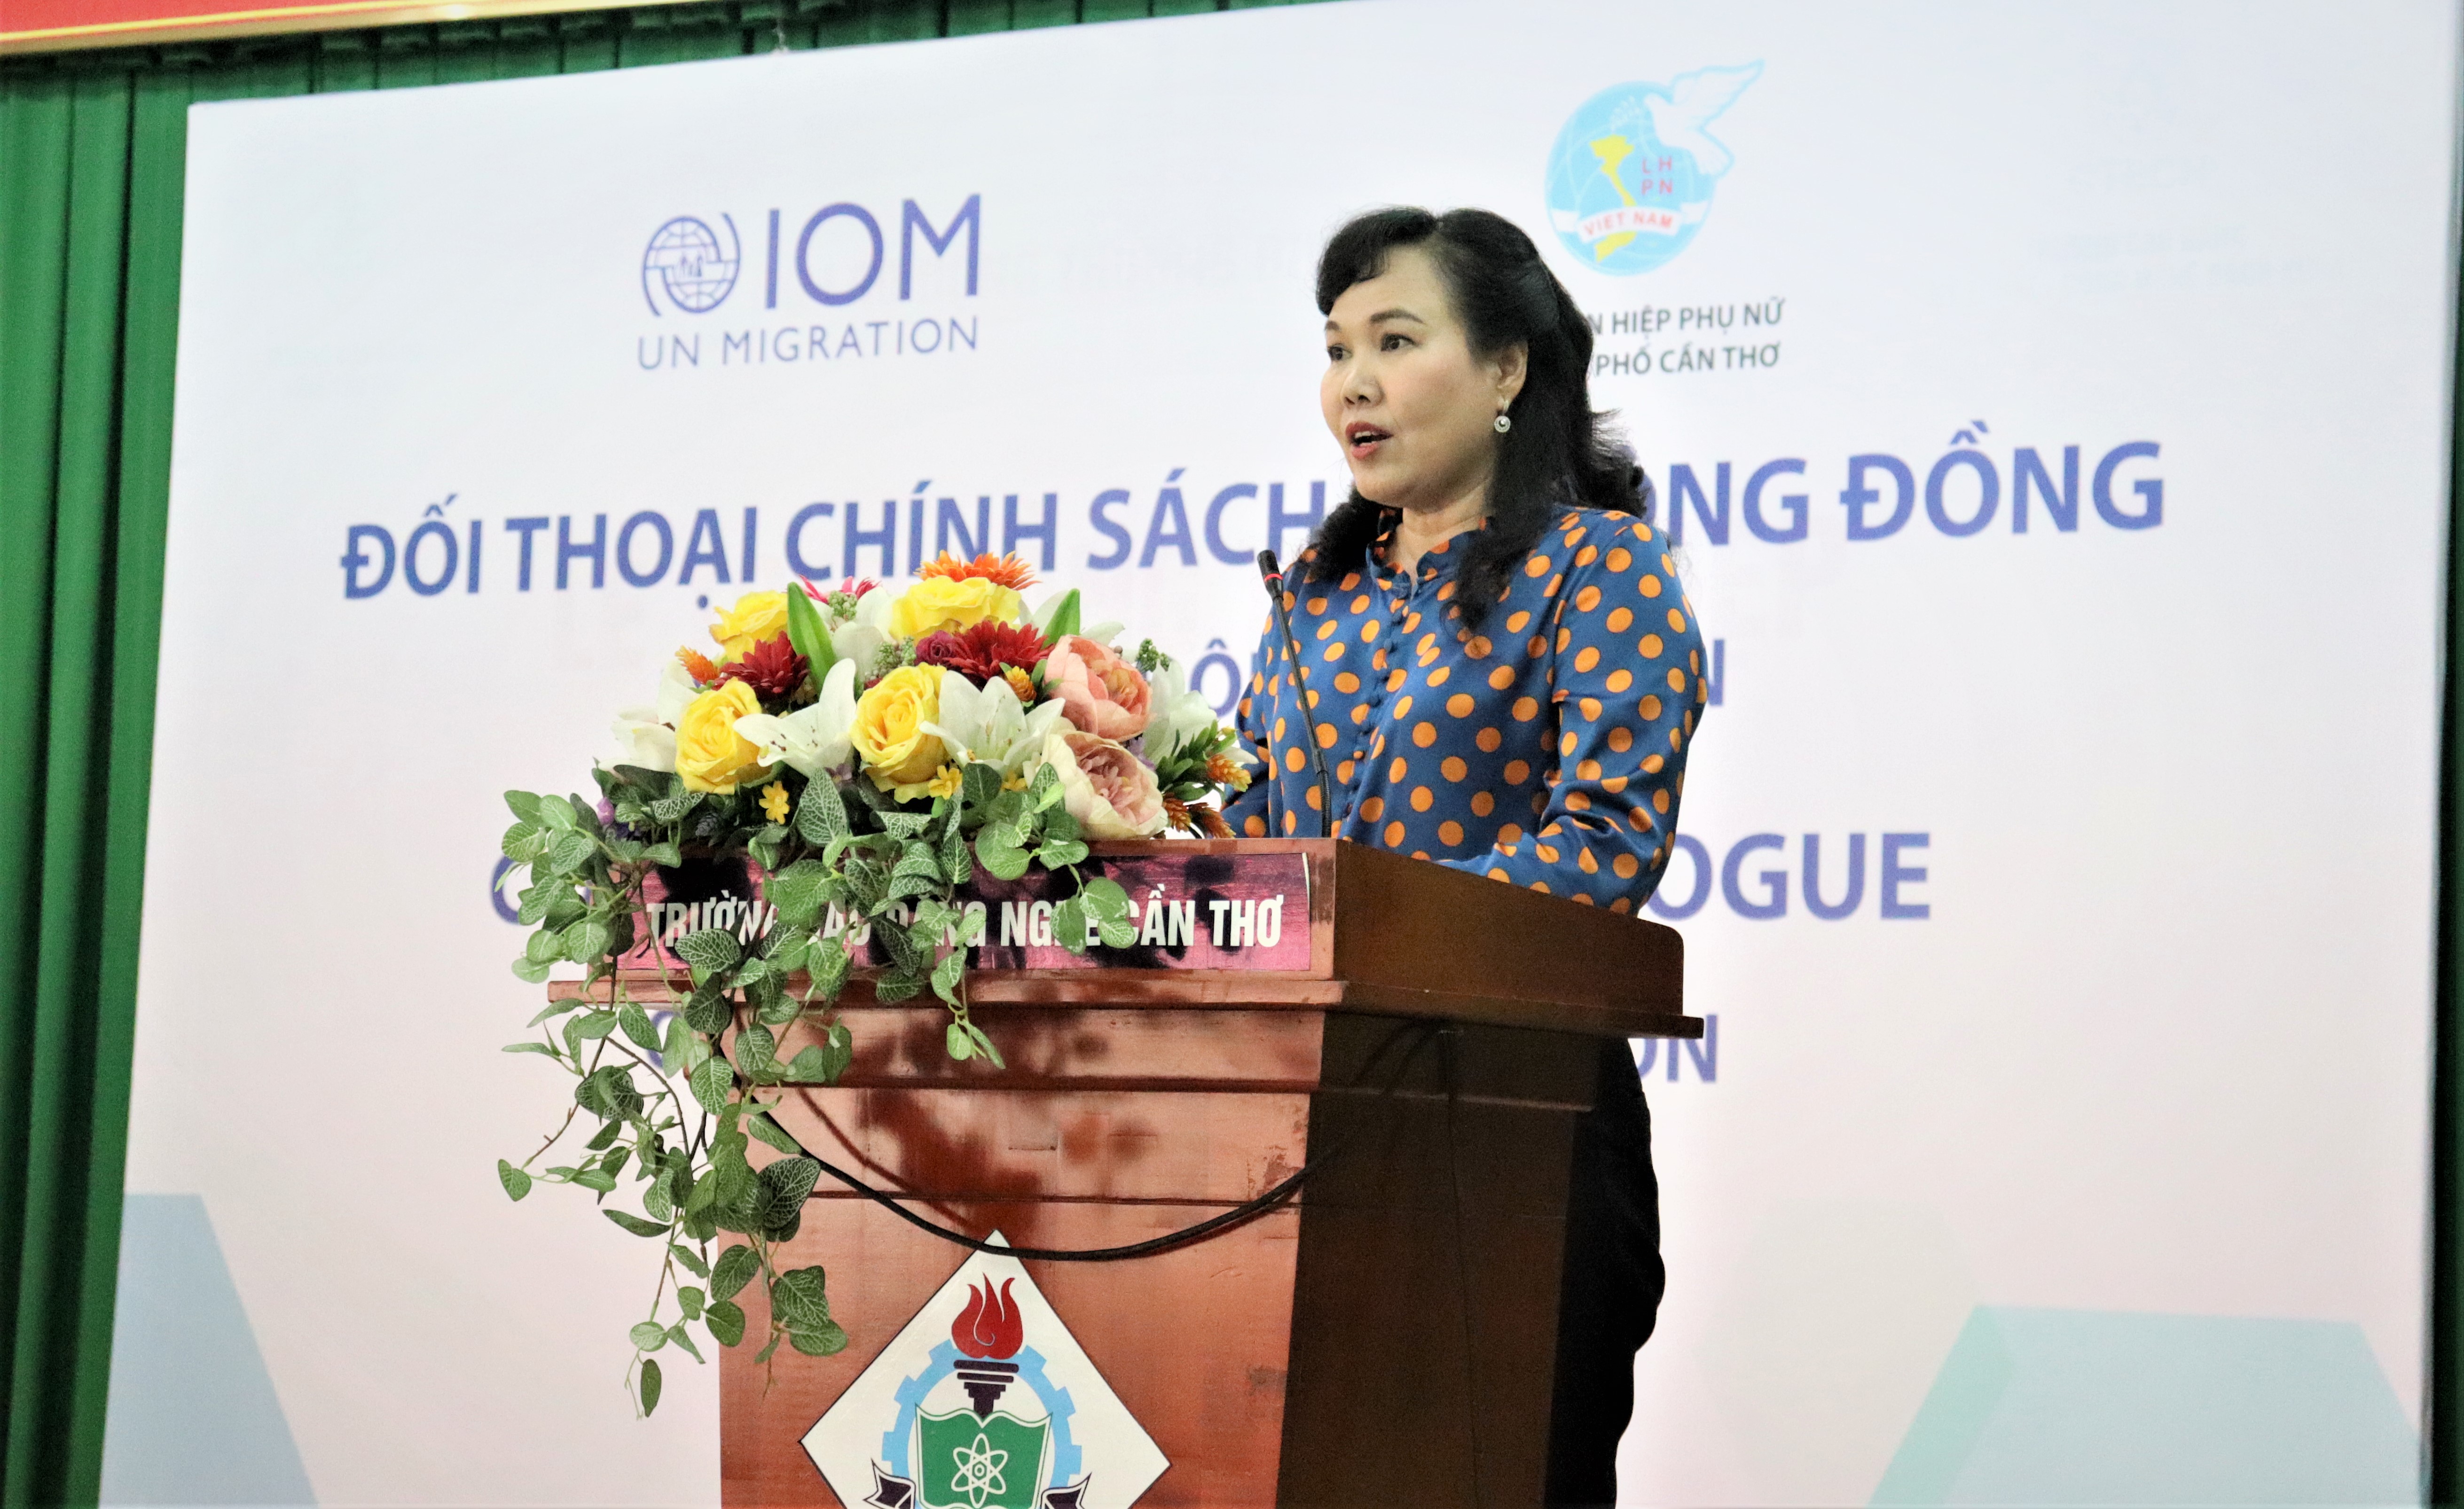 Ms. Vo Kim Thoa, Chairwoman of the Can Tho Women's Union delivering the opening speech during a policy dialogue in Can Tho @ Photo: IOM Viet Nam